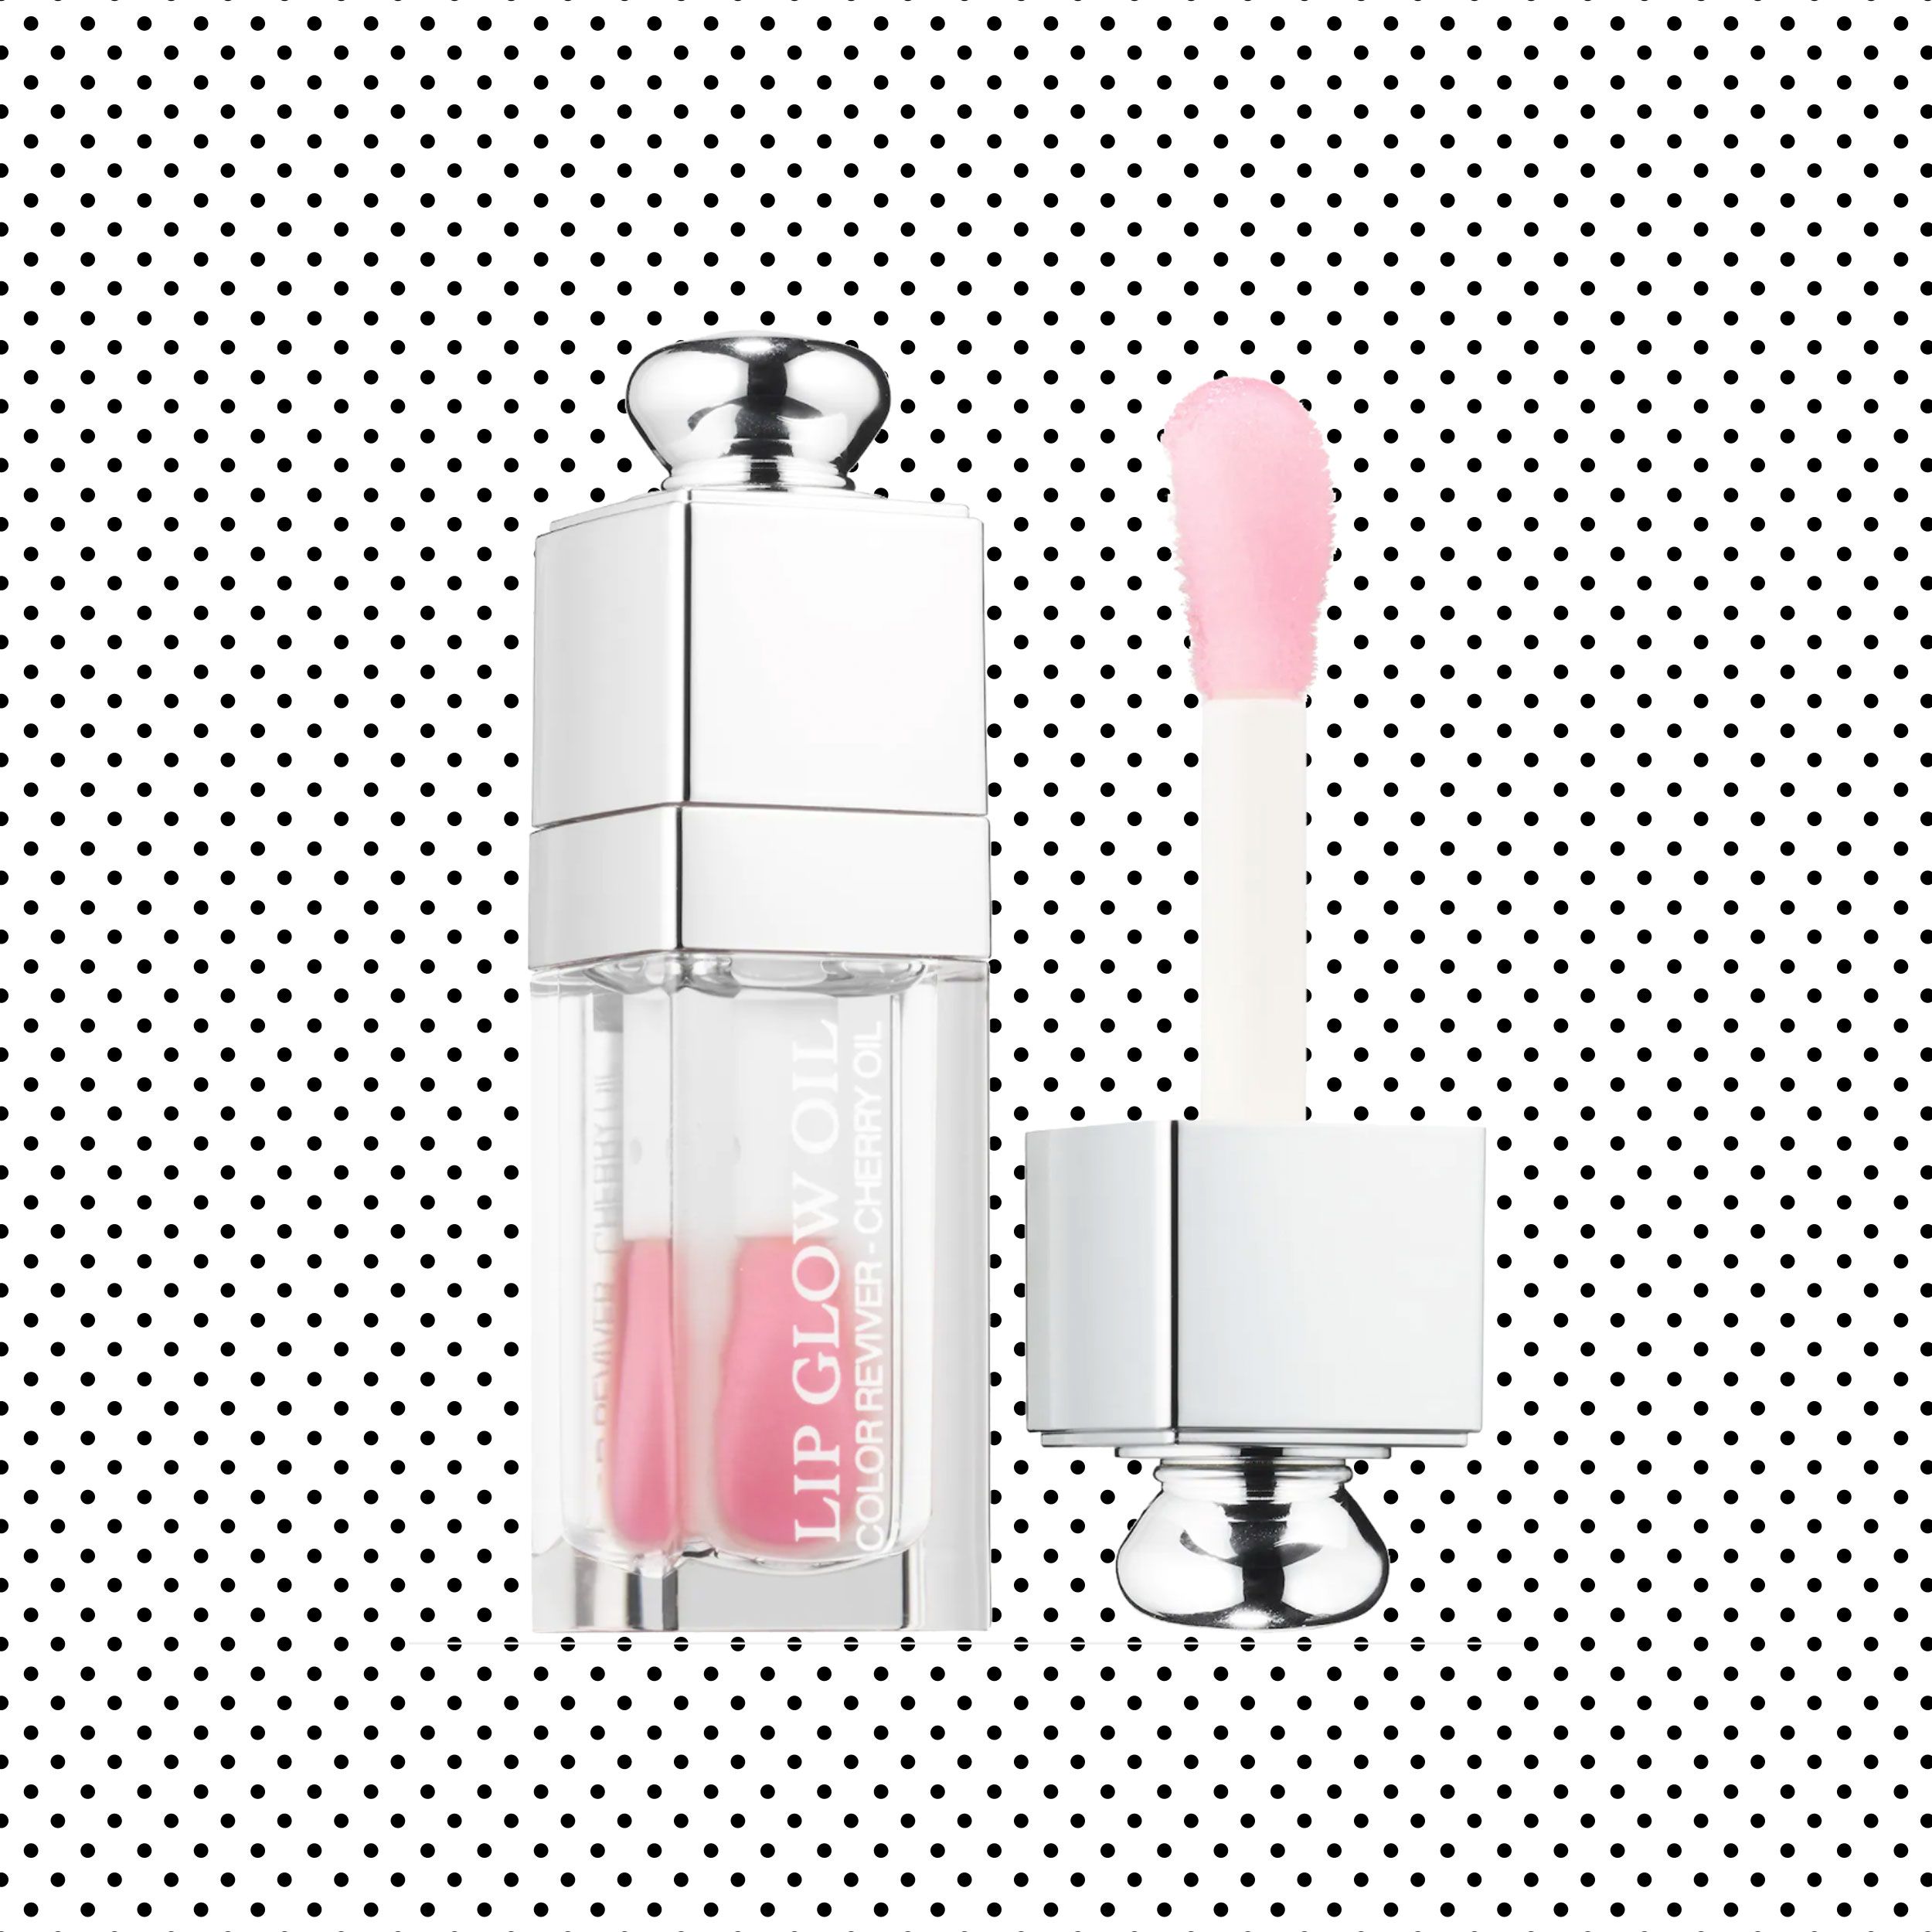 Why Is the Dior Beauty Lip Glow Oil So Popular?